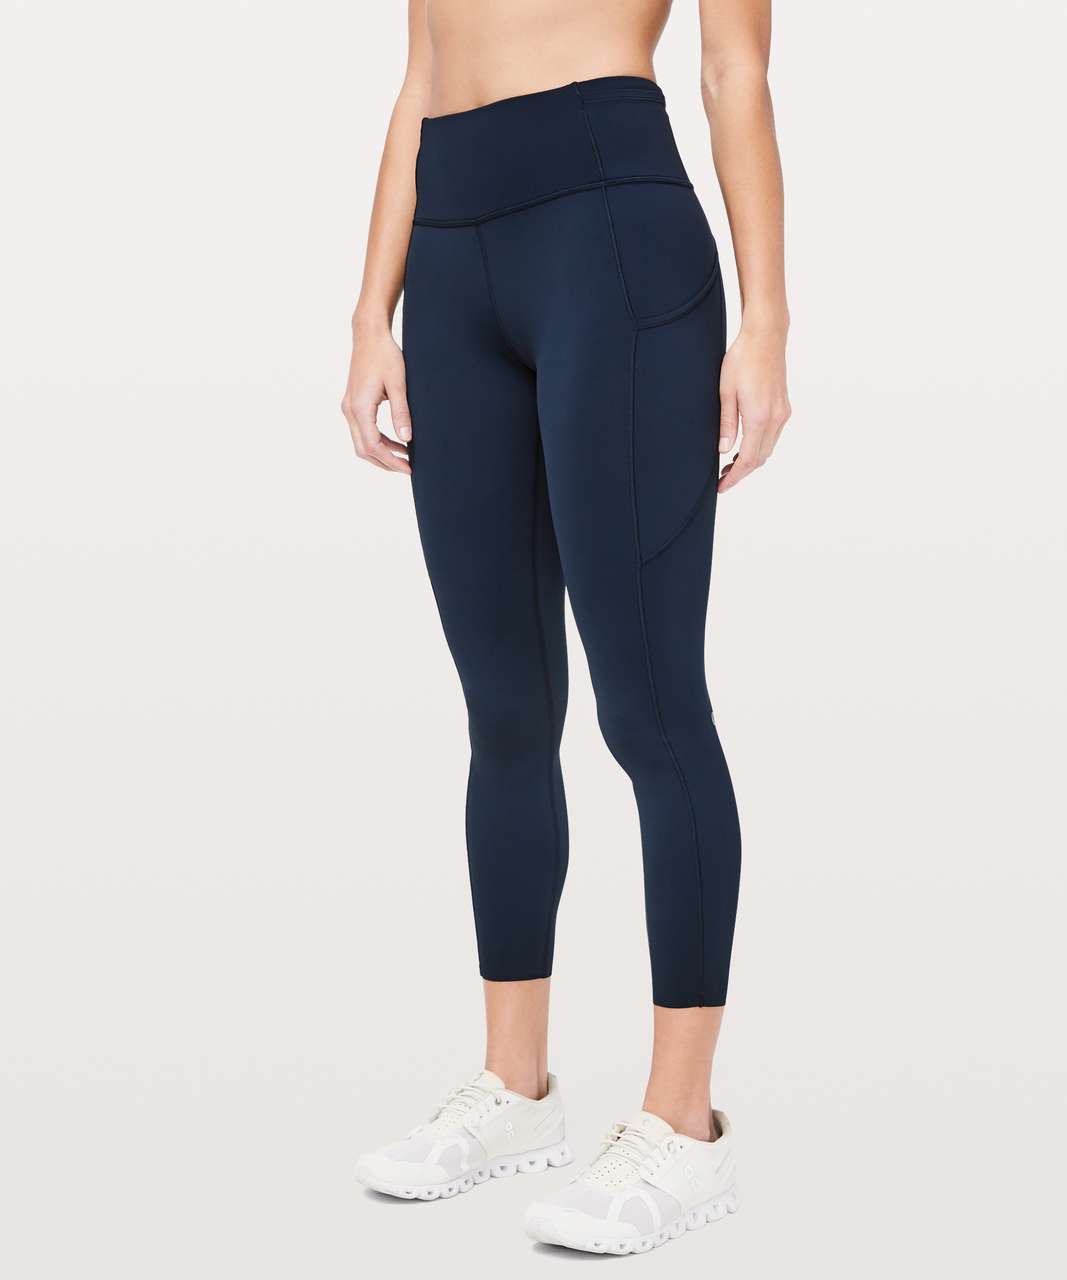 Lululemon Sz. 6 Fast Tight II 25 Nulux W5BXQS legging pants for